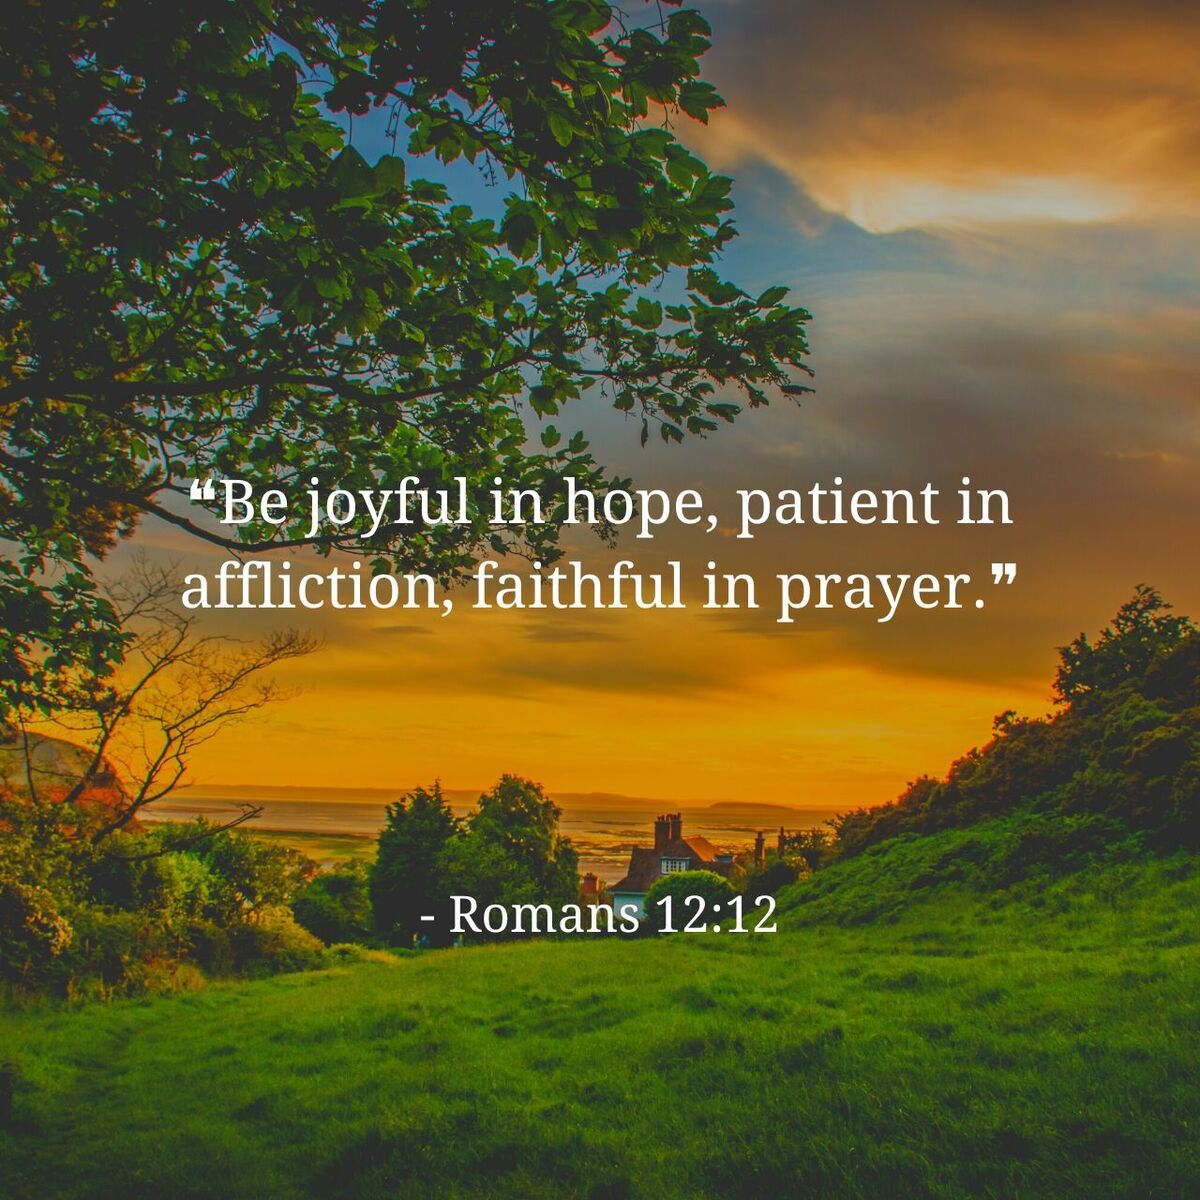 We are also called to be patient in affliction. The trials we face shape us and make us stronger. Recognize that God is with us every step of the way. Lastly, we are encouraged to be faithful in prayer. Stay connected to God and bring your worries and concerns to Him. #GodBless